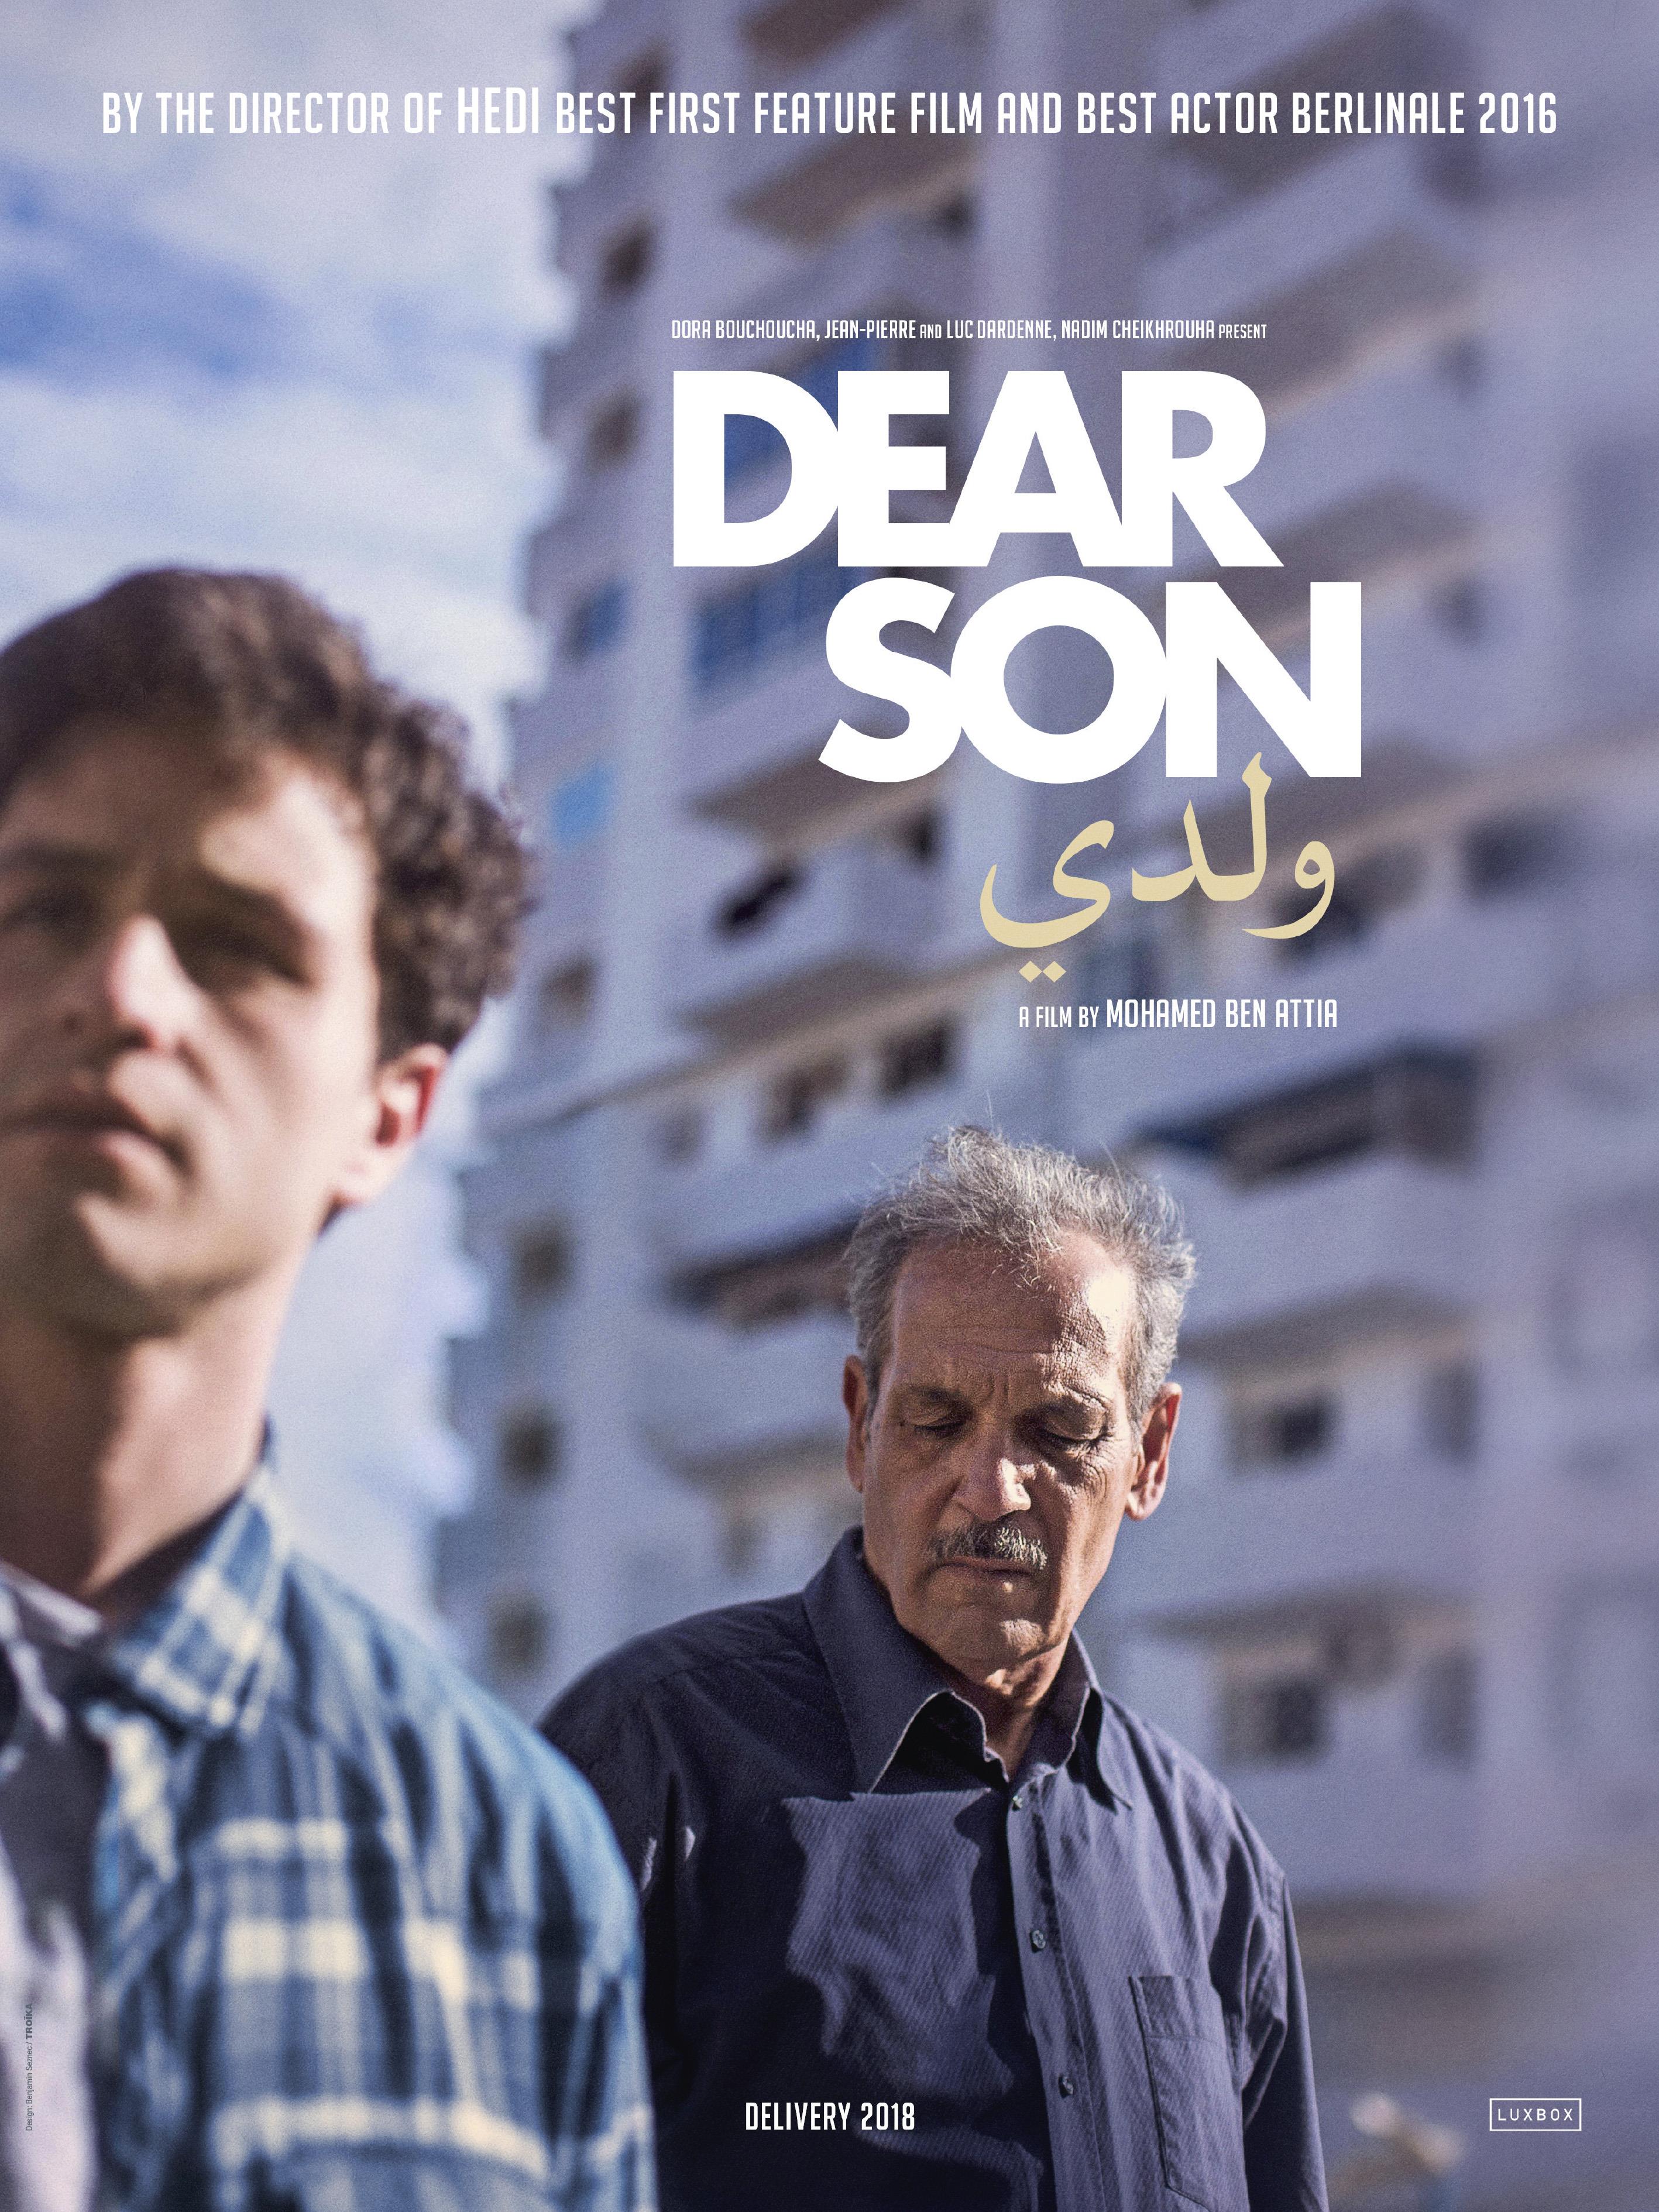 Film poster for Mohammed Ben Atiaʹs "Dear Son" (distributed by BAC Films)